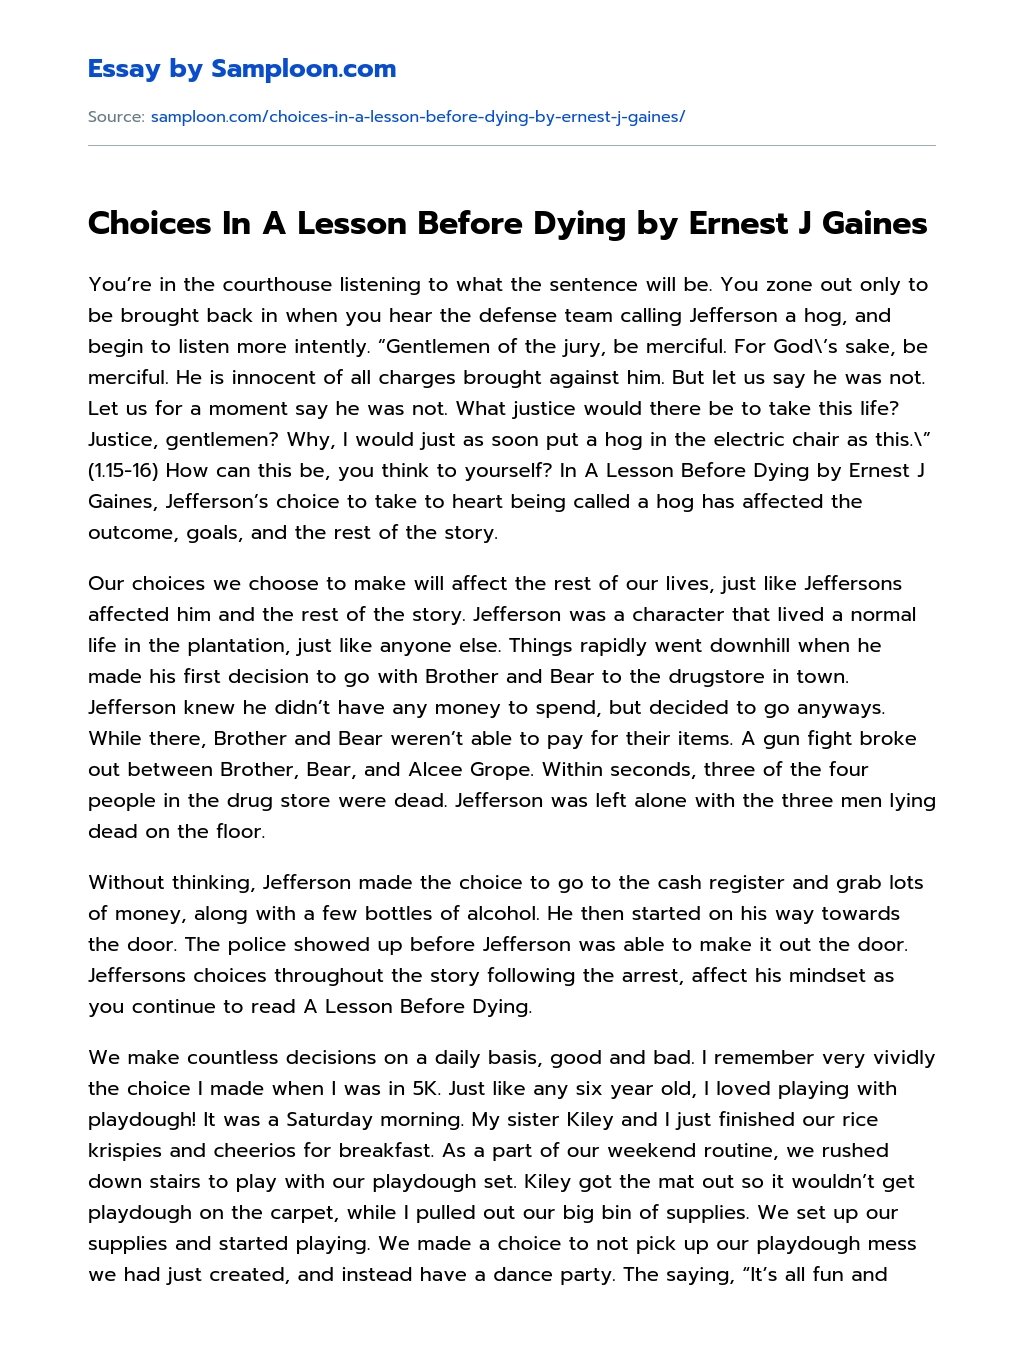 Choices In A Lesson Before Dying by Ernest J Gaines essay